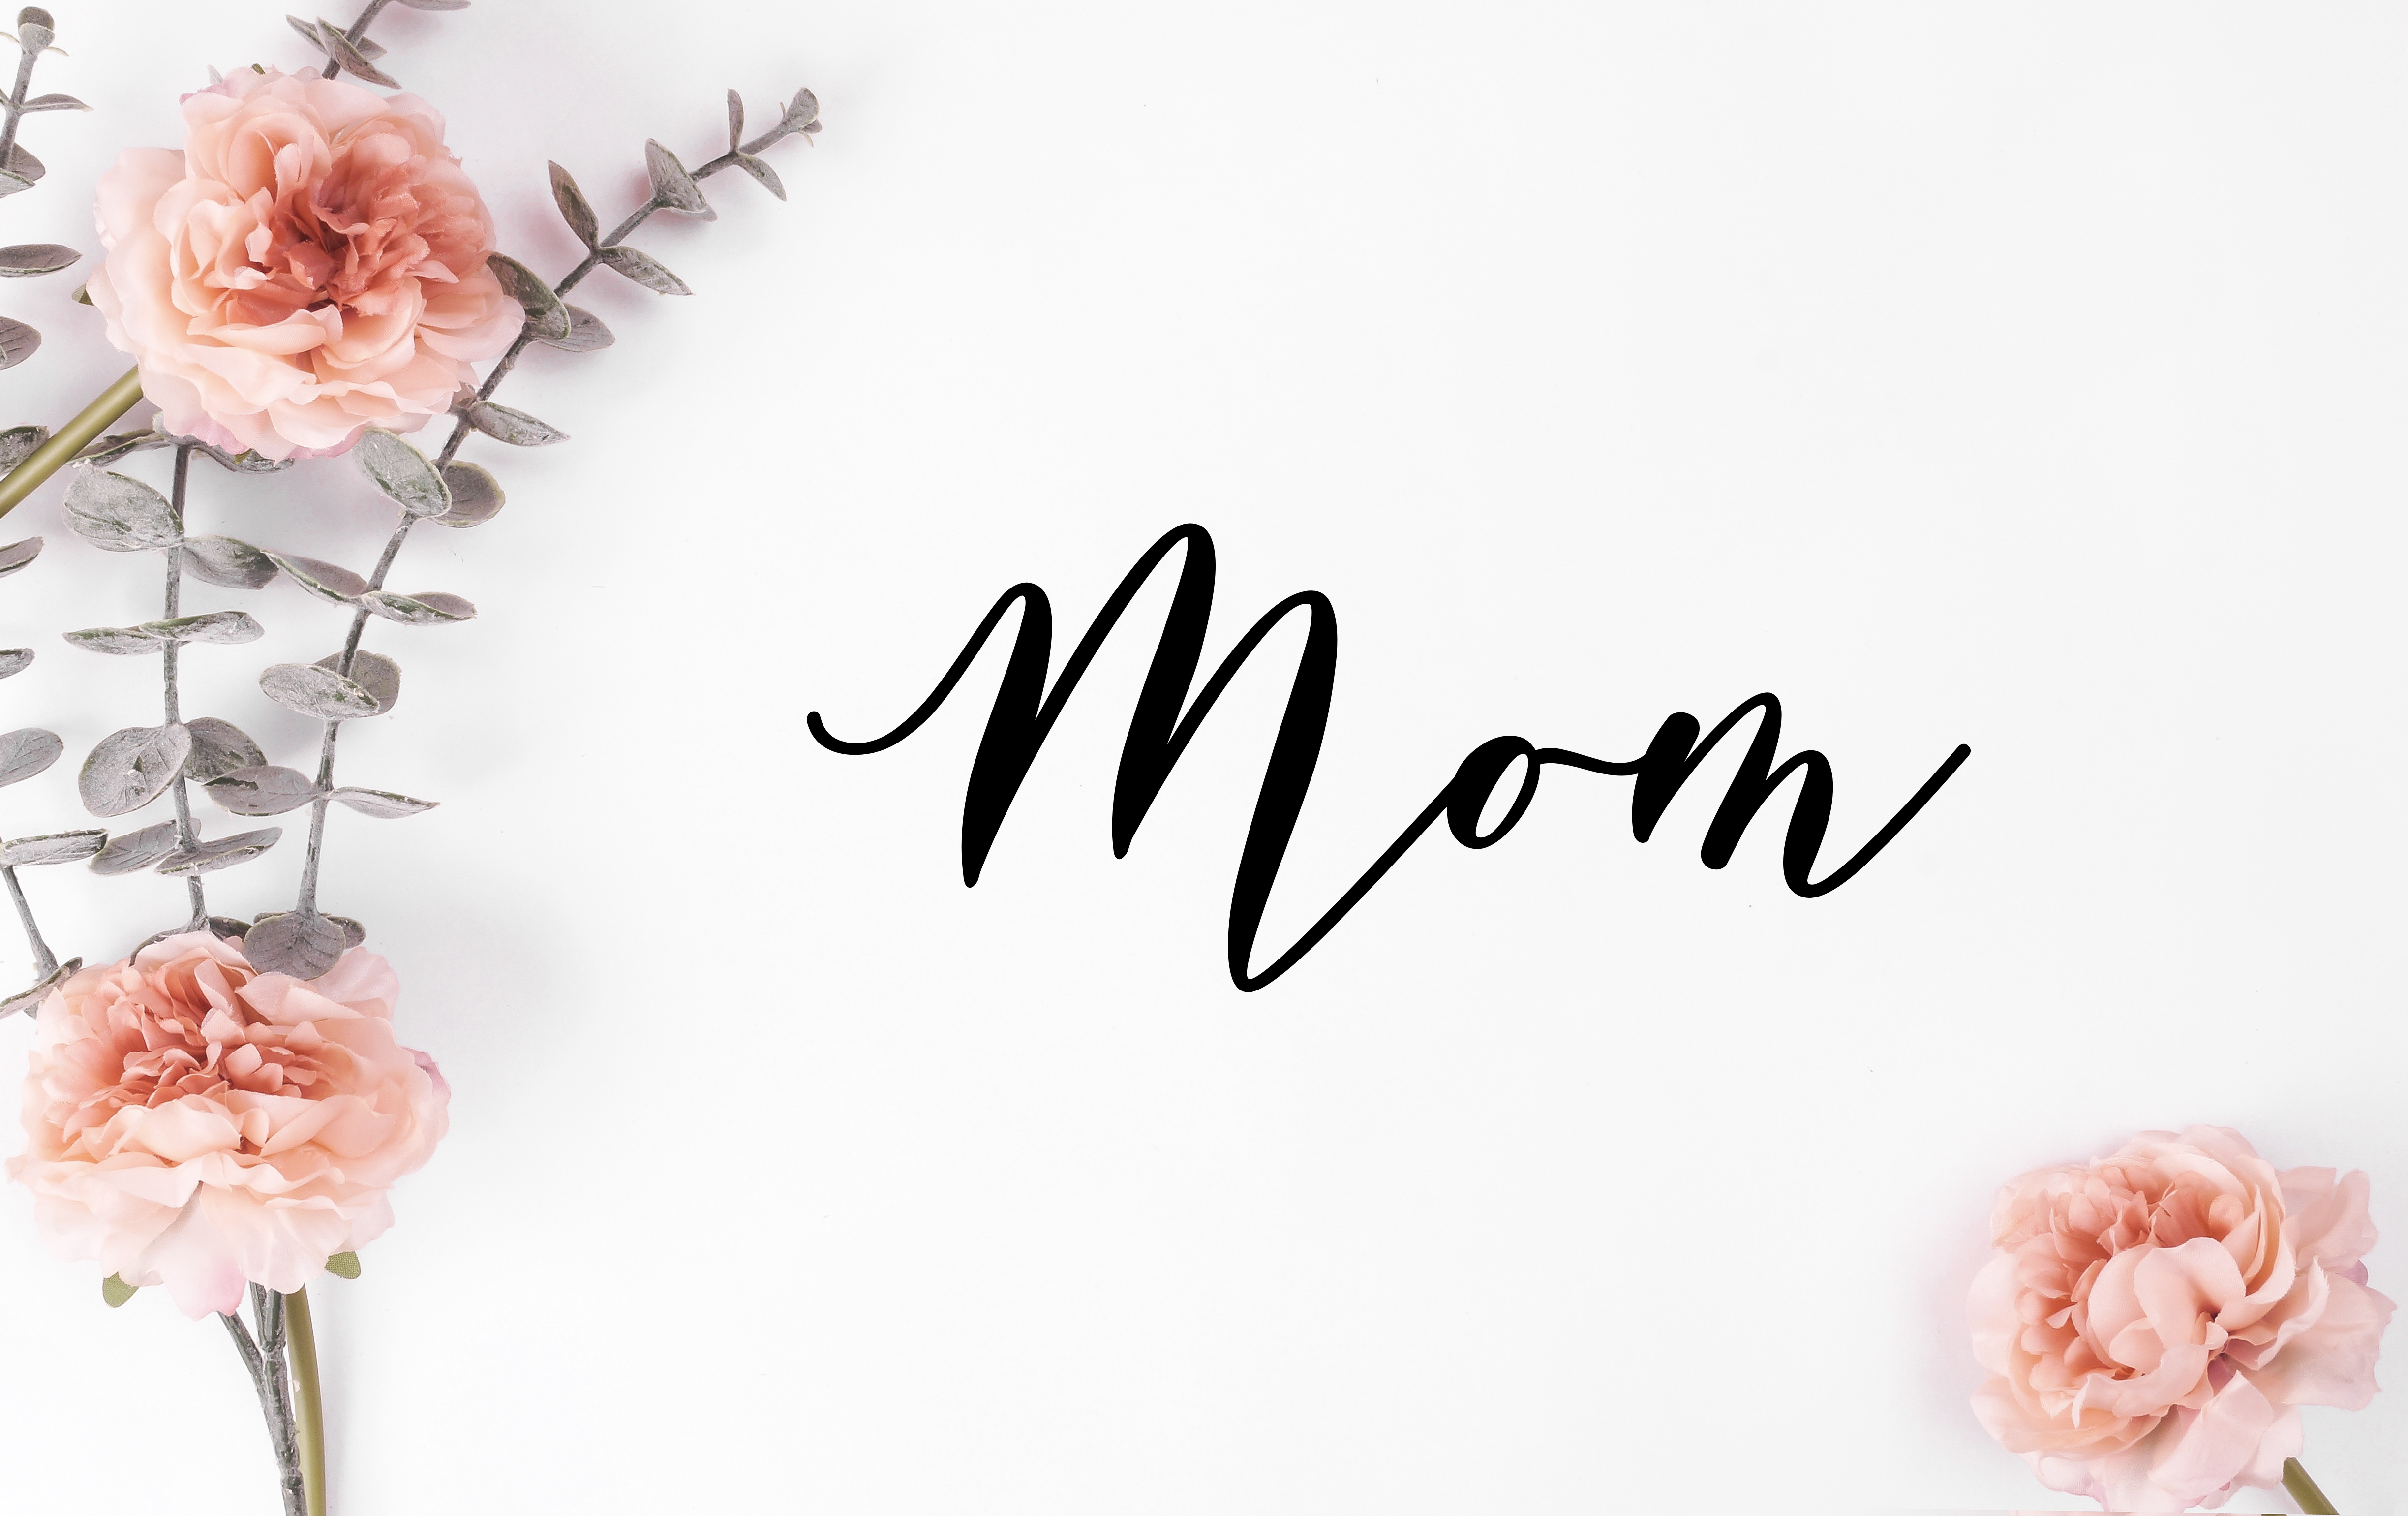 Mom Decal - Holiday Mother/Mom/Mama Vinyl Decals for Home, Gifts, Businesses and More!